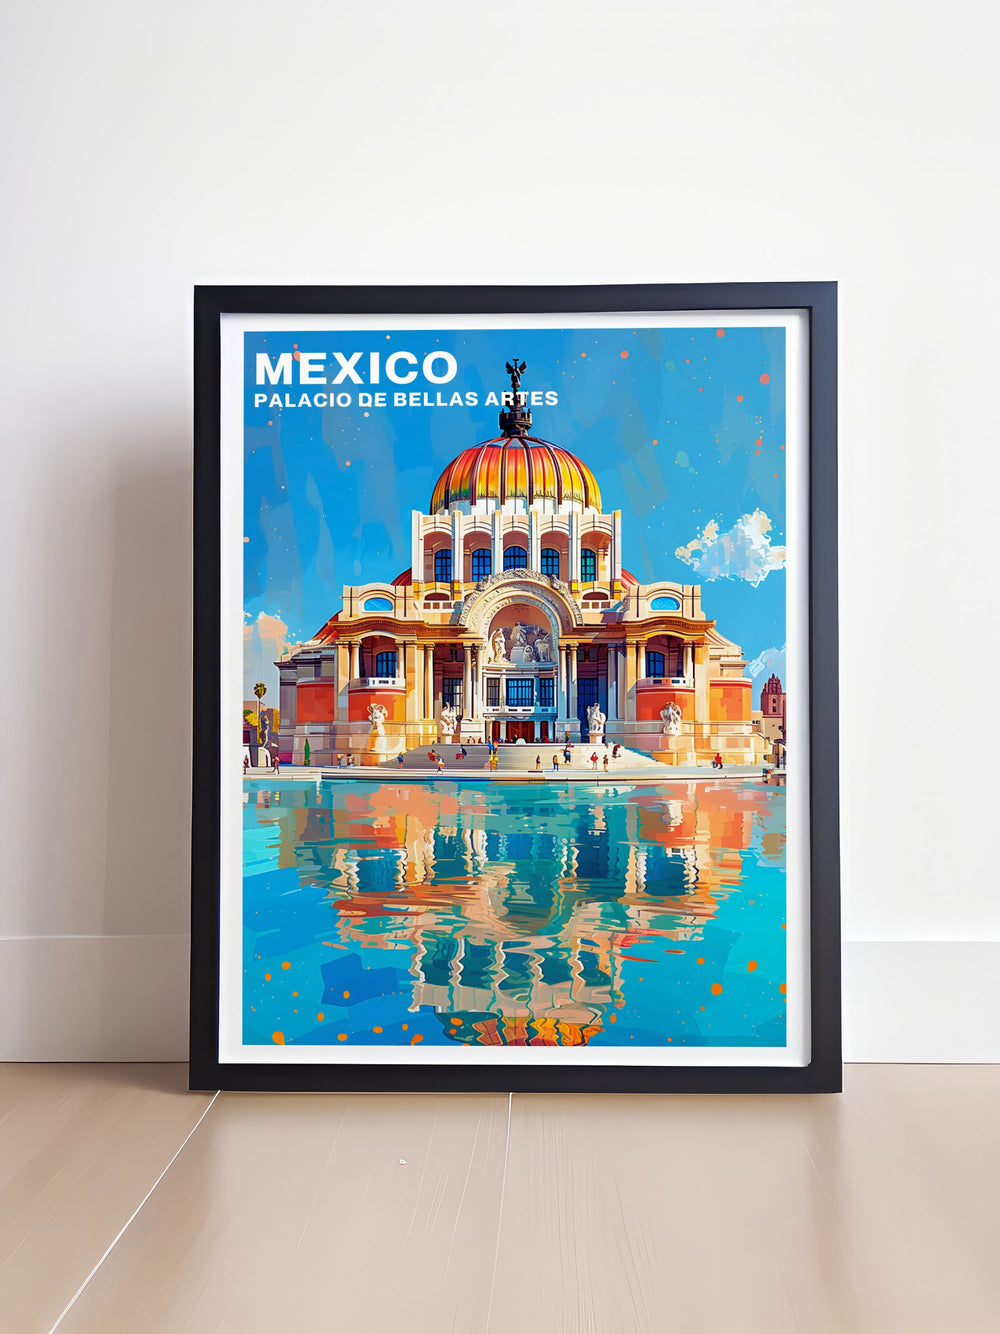 Immerse yourself in the artistic splendor of Palacio de Bellas Artes with this vibrant travel poster. A perfect addition to your Mexico decor collection. This Palacio de Bellas Artes print captures the essence of this iconic landmark and is perfect for home decor or as a gift.